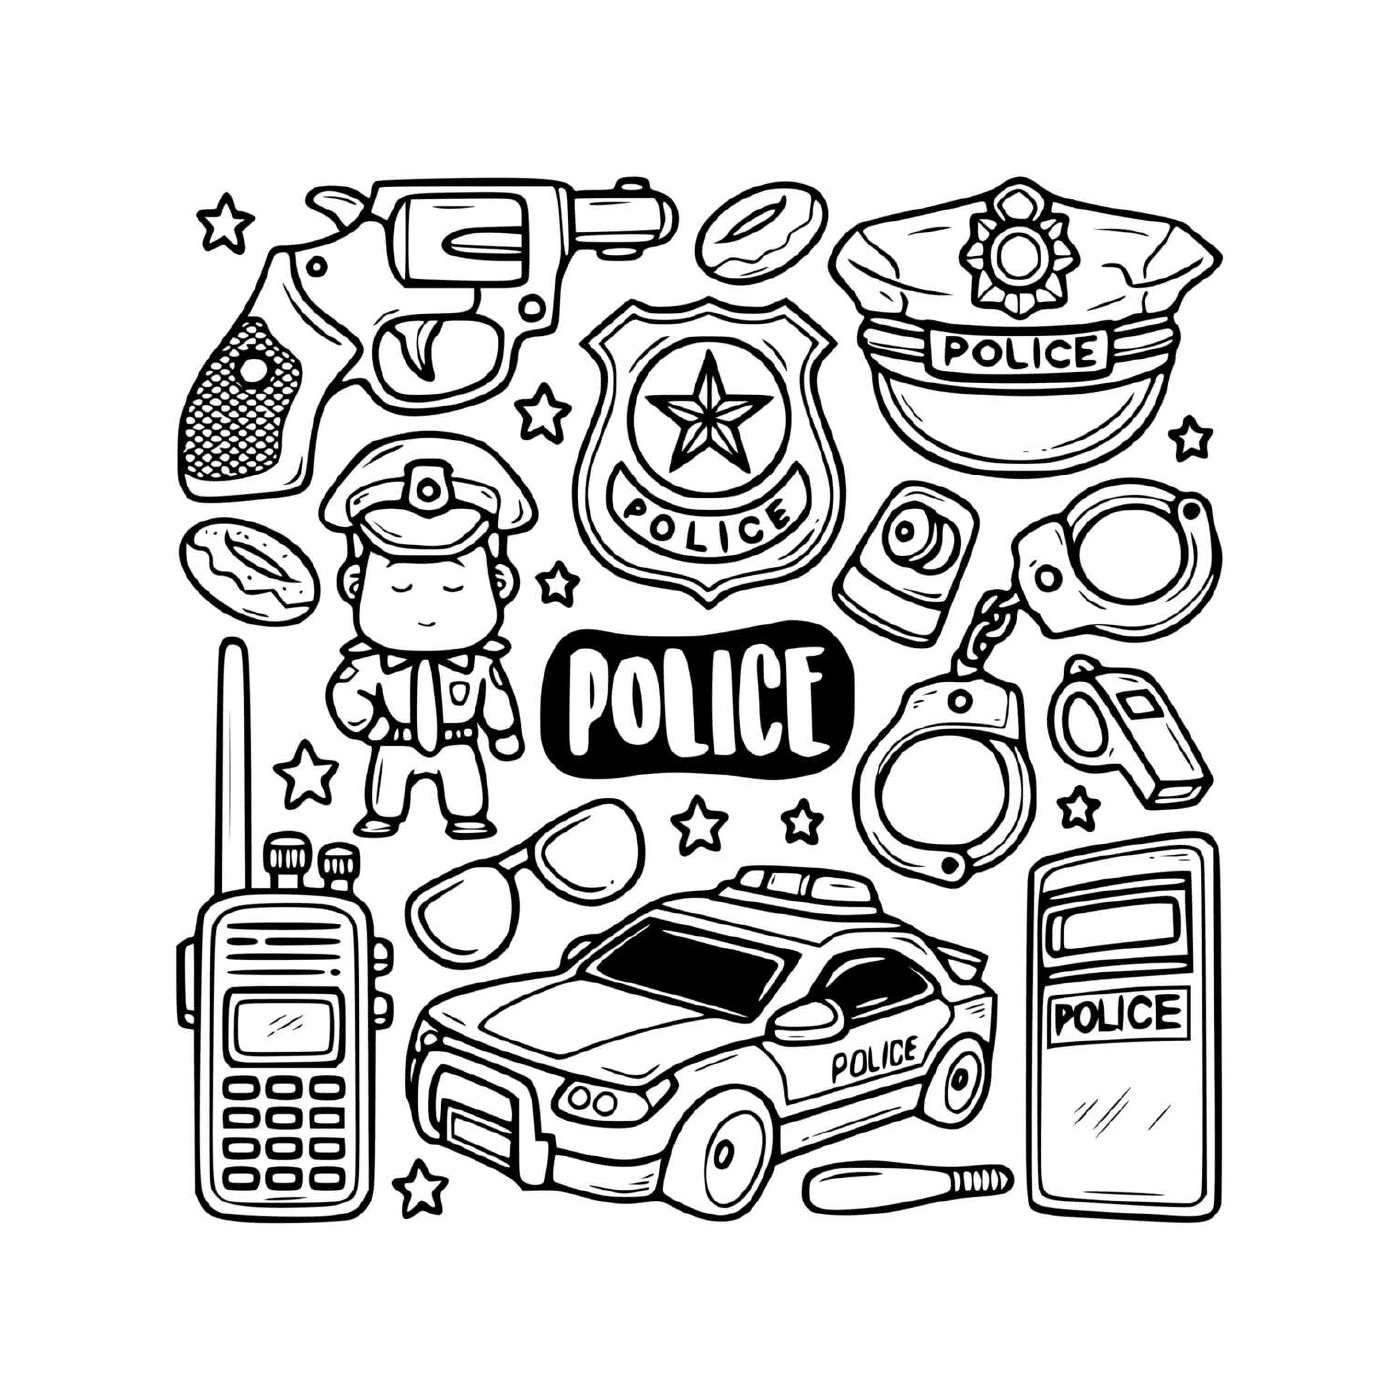  Police icons in black and white 